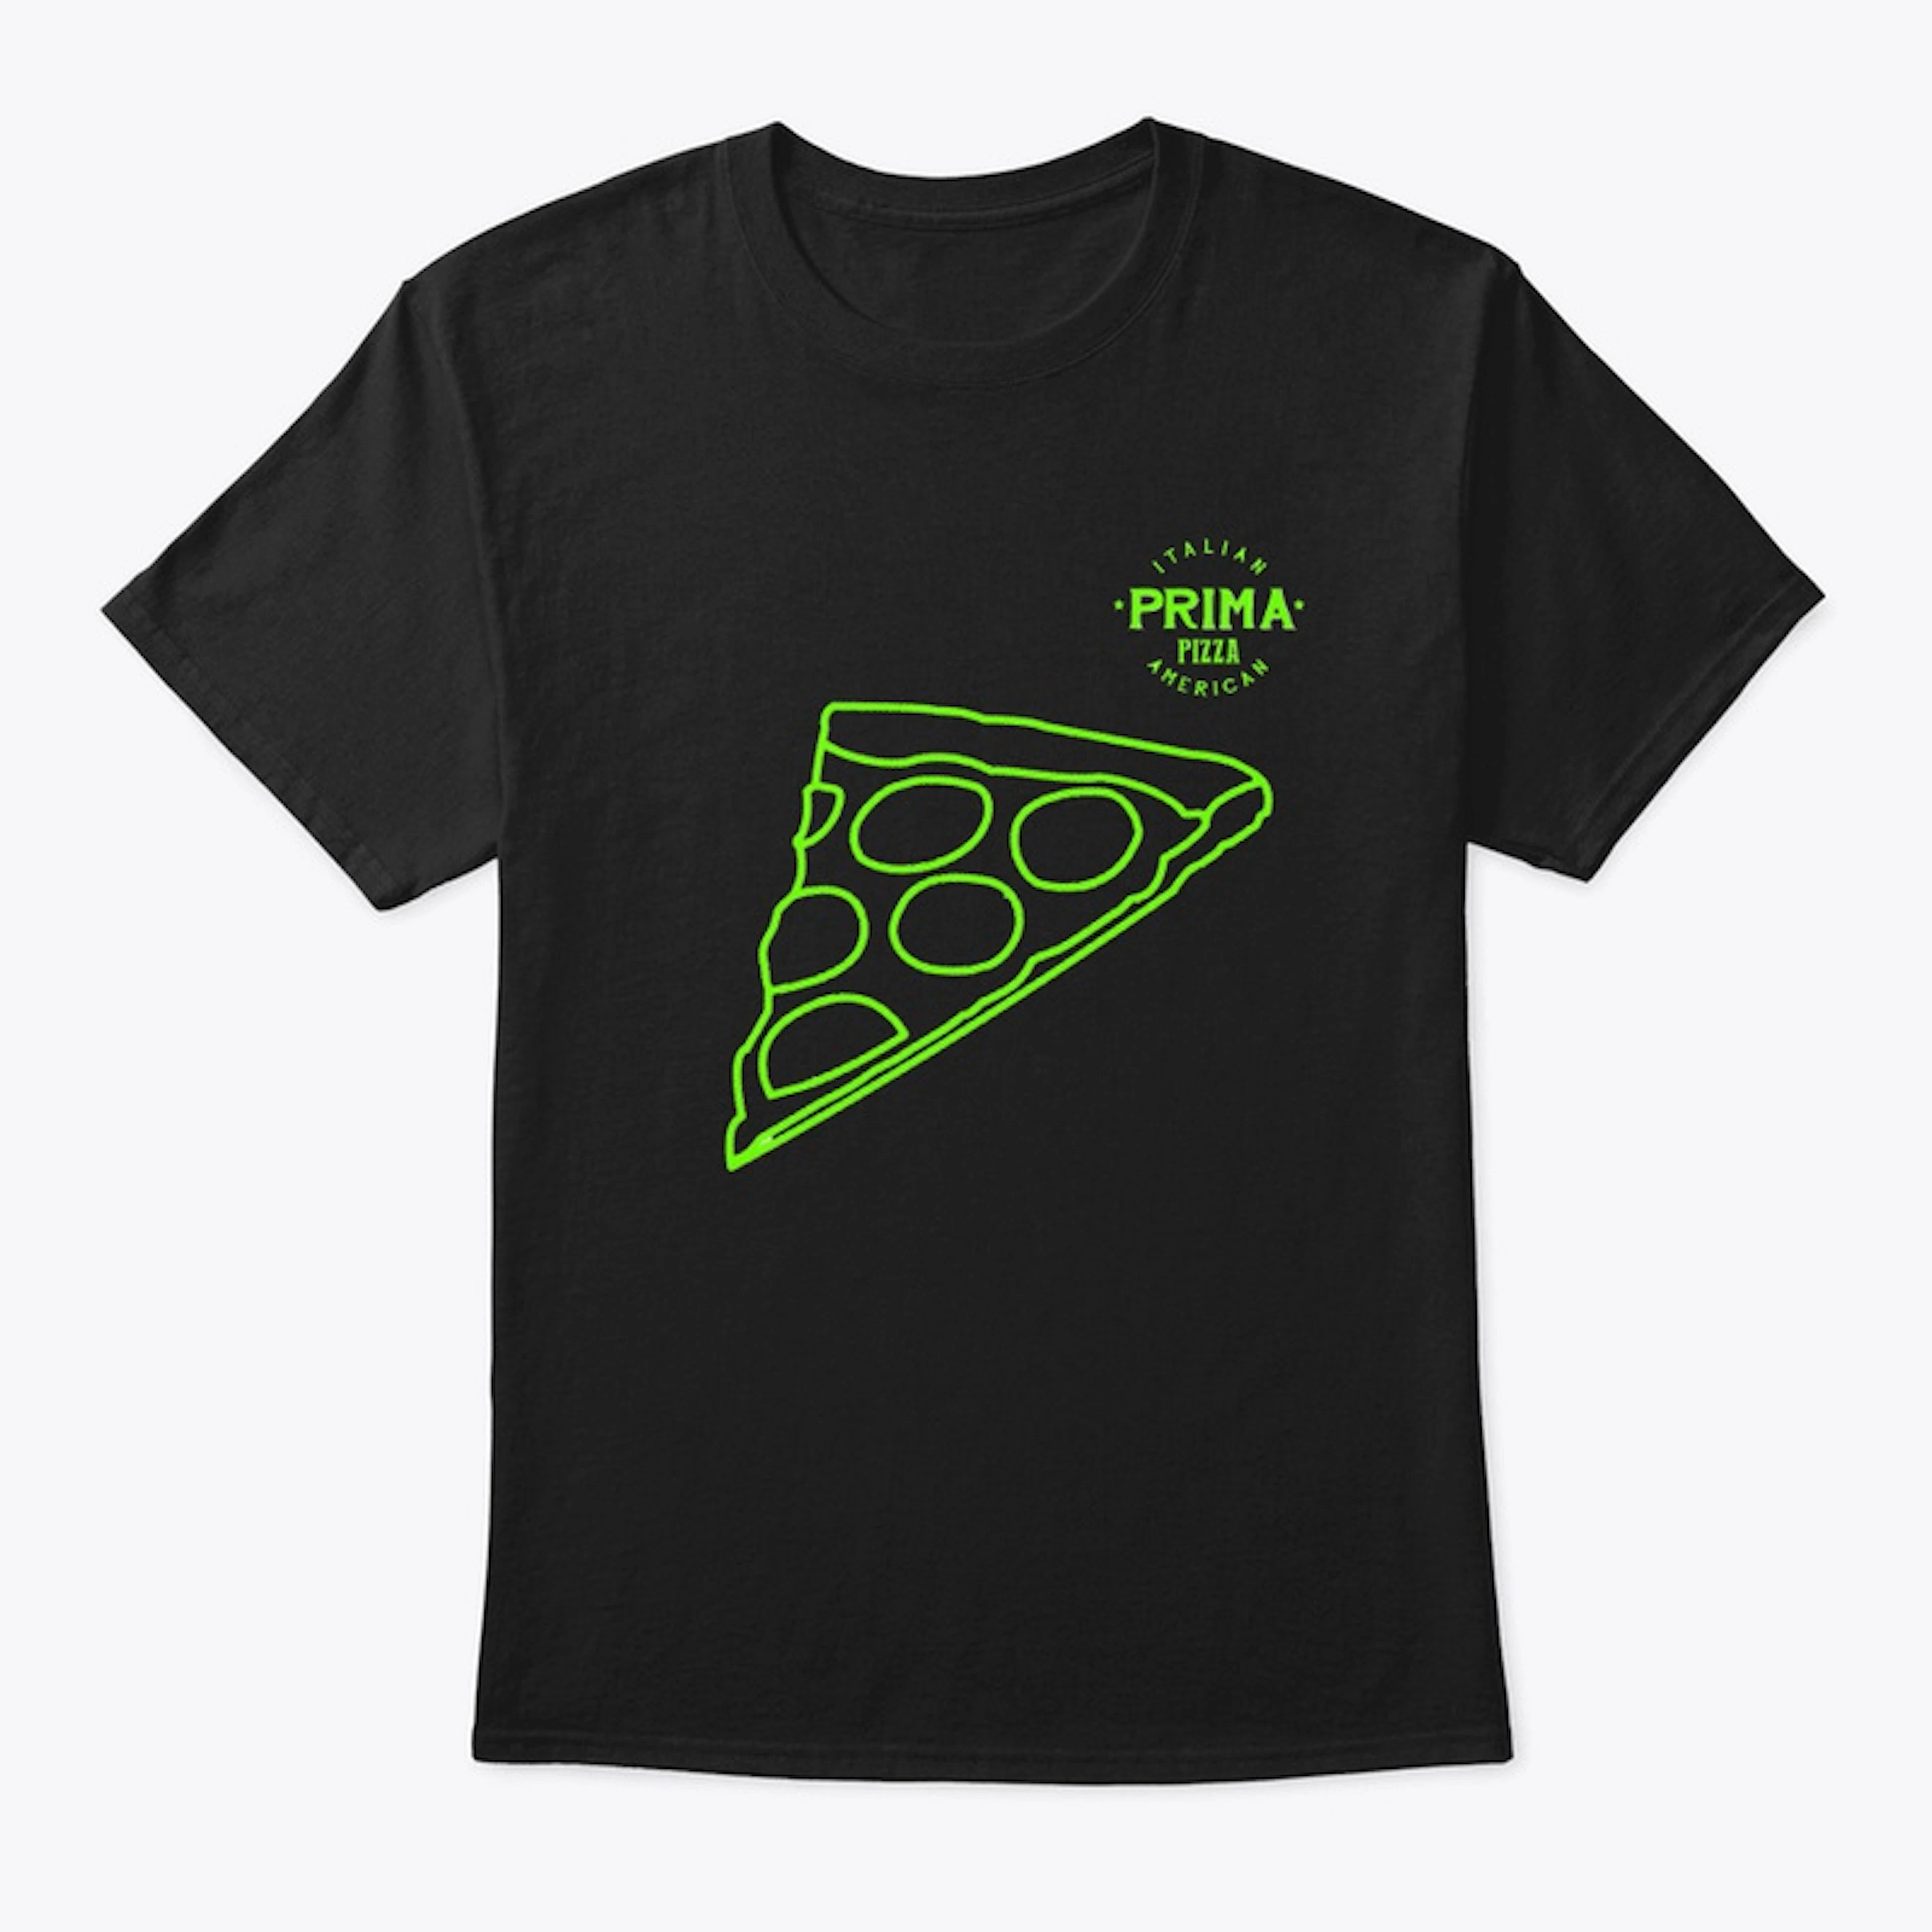 The Pizza Party LIMITED EDITION shirt